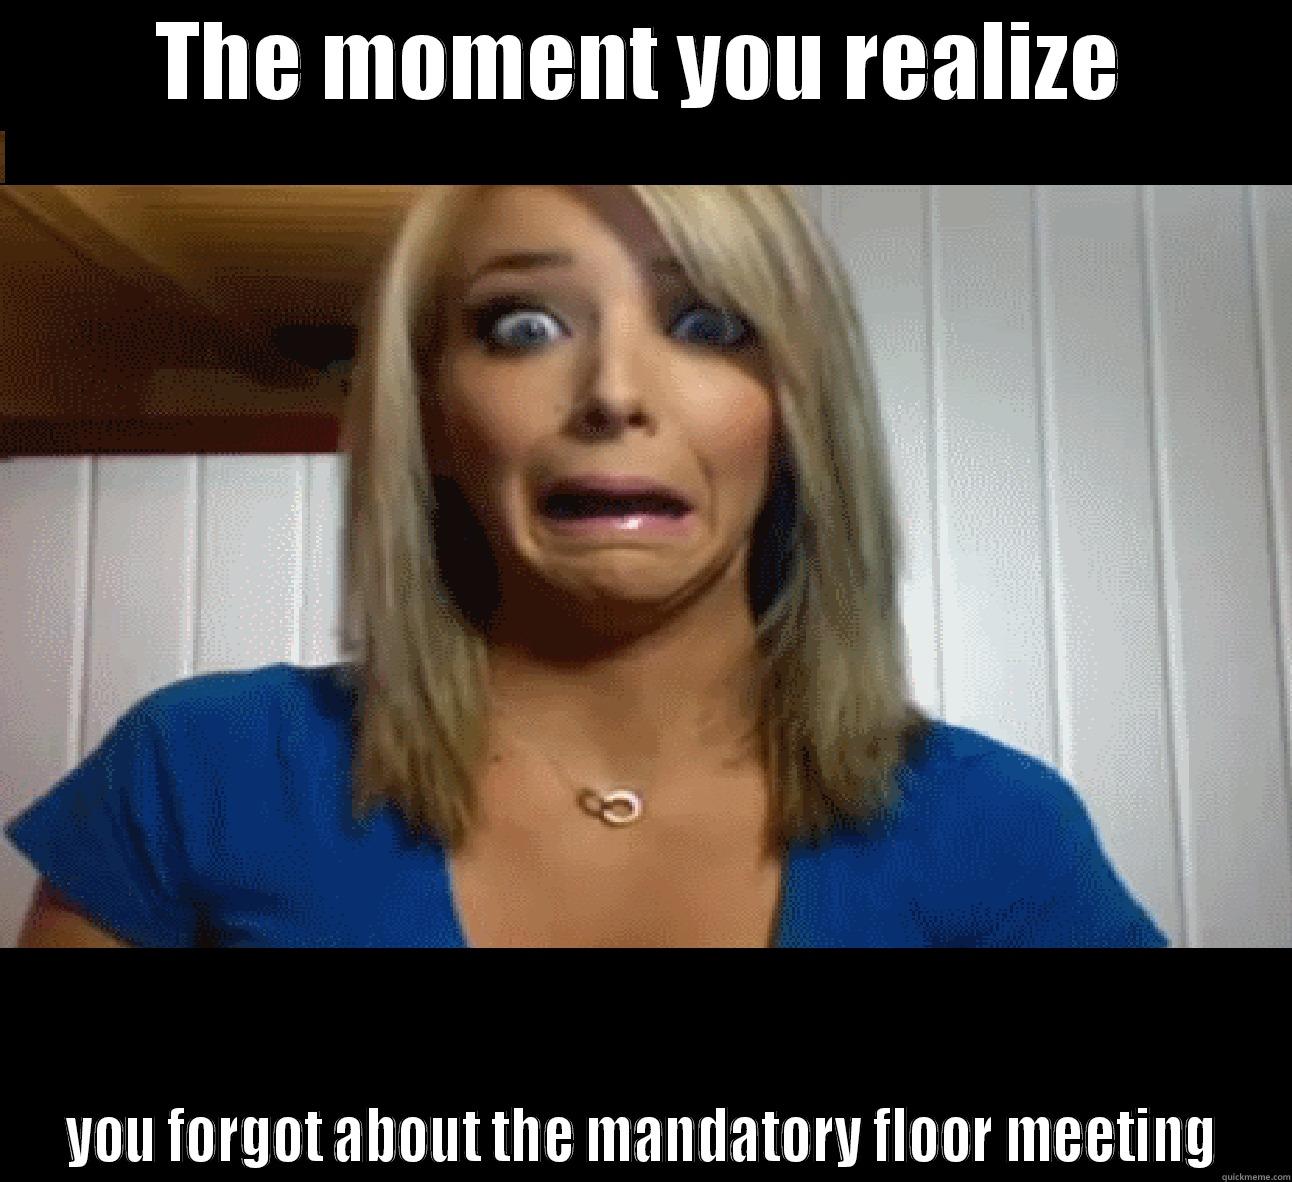 The moment you realize: Res life - THE MOMENT YOU REALIZE YOU FORGOT ABOUT THE MANDATORY FLOOR MEETING Misc